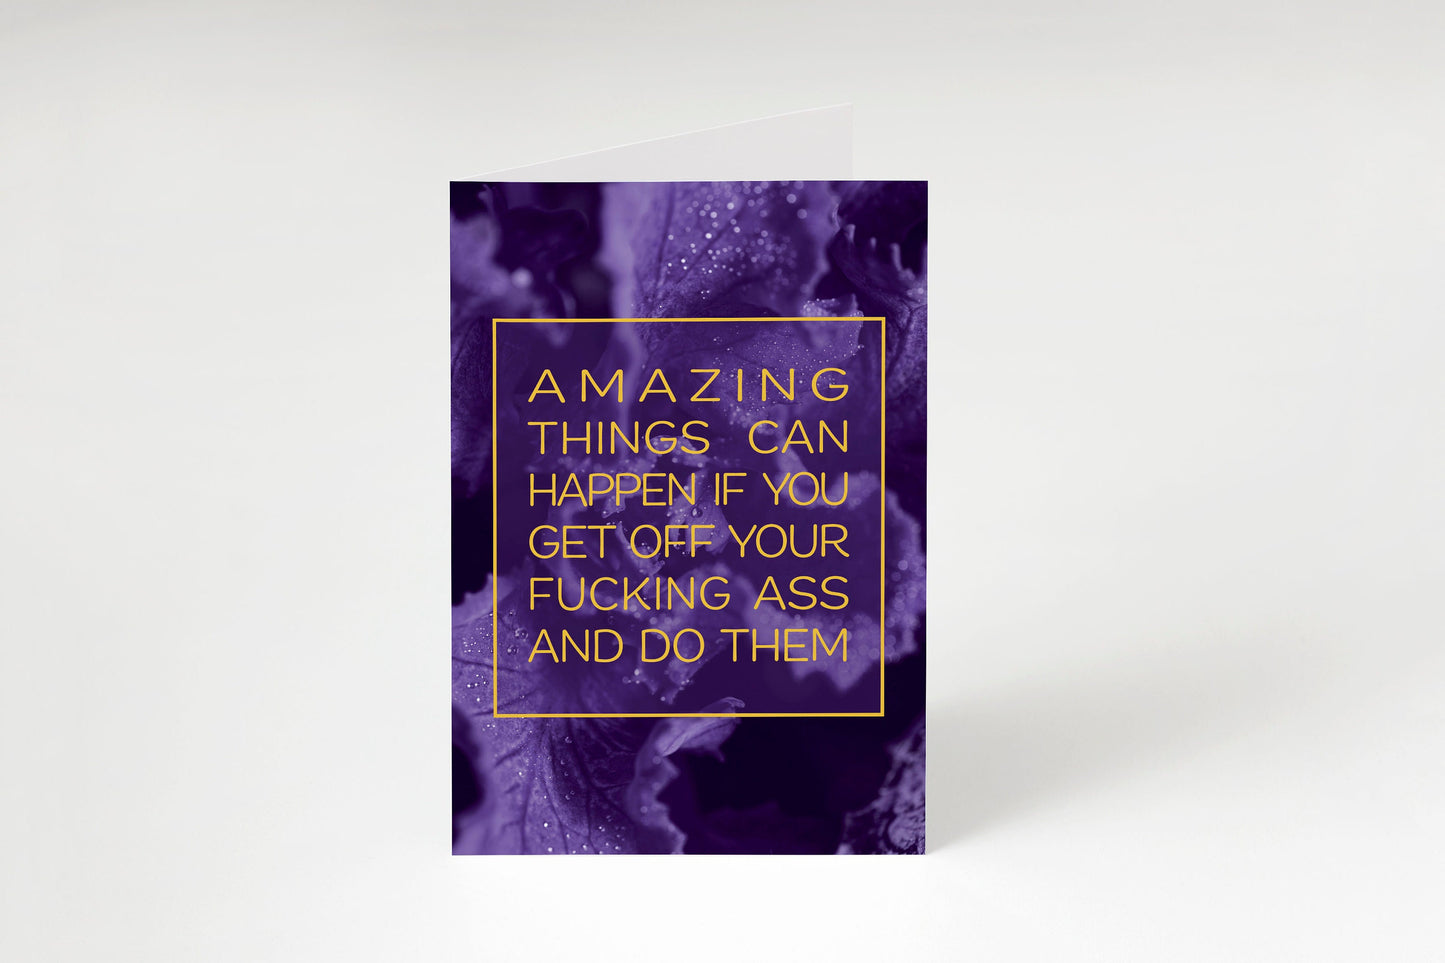 The Sweary Affirmation Shop - Sweary Affirmation Notecards - Pack of 4, Blank Greeting Card Set, Flower Art Cards, Just Because Cards, Funny Quotes and Insults